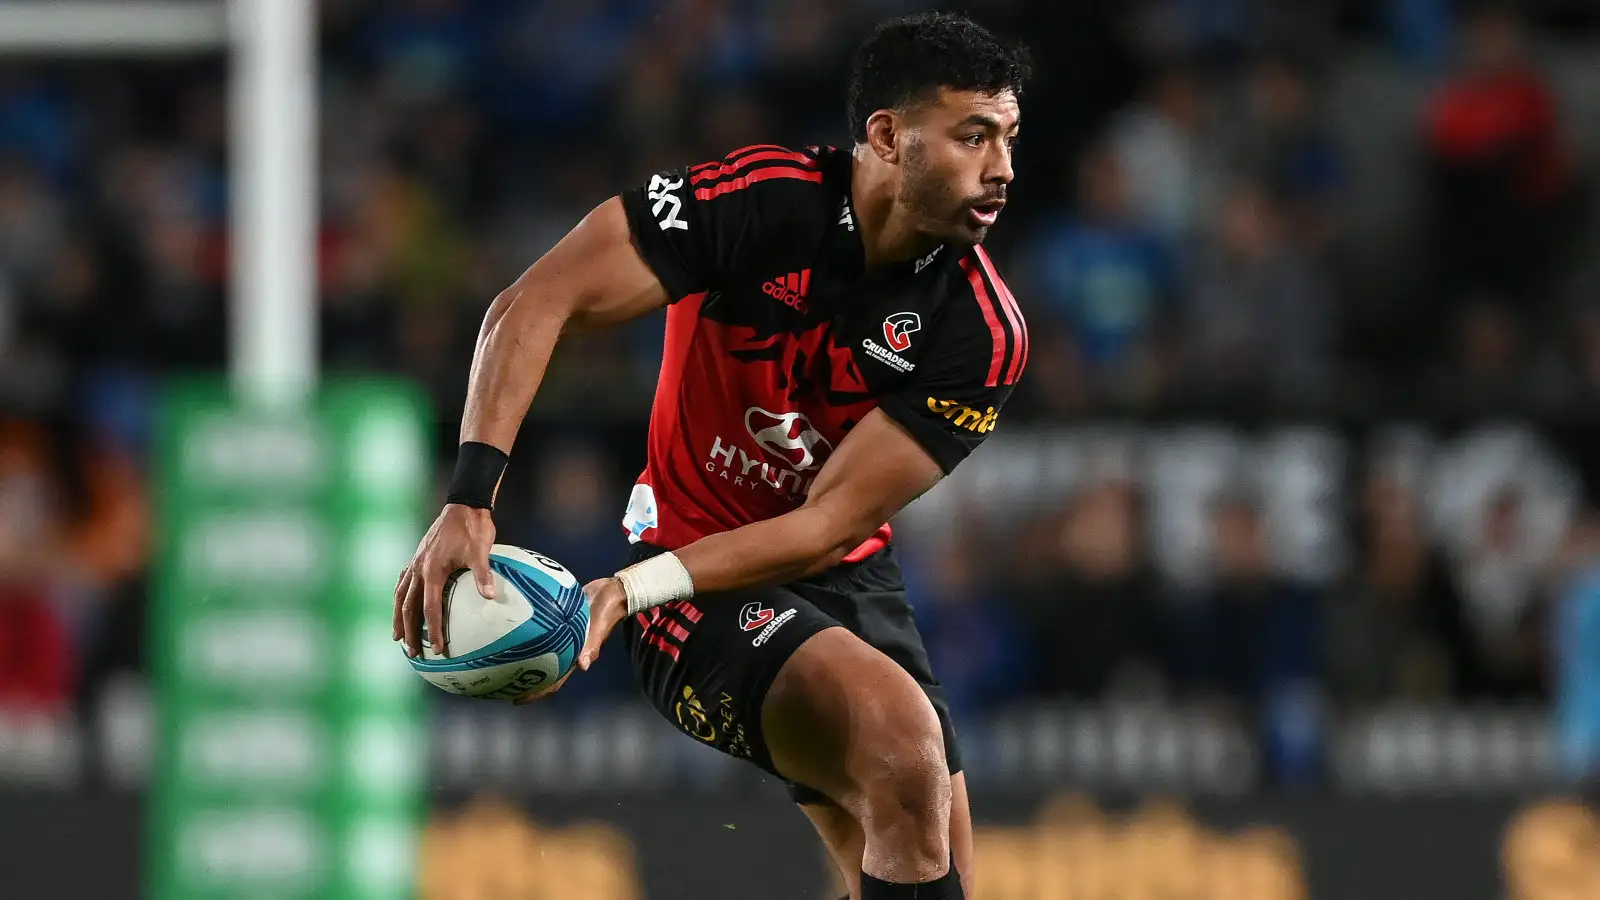 Super Rugby Pacific: Five takeaways from Blues v Crusaders including Richie Mo’unga getting the better of Beauden Barrett again